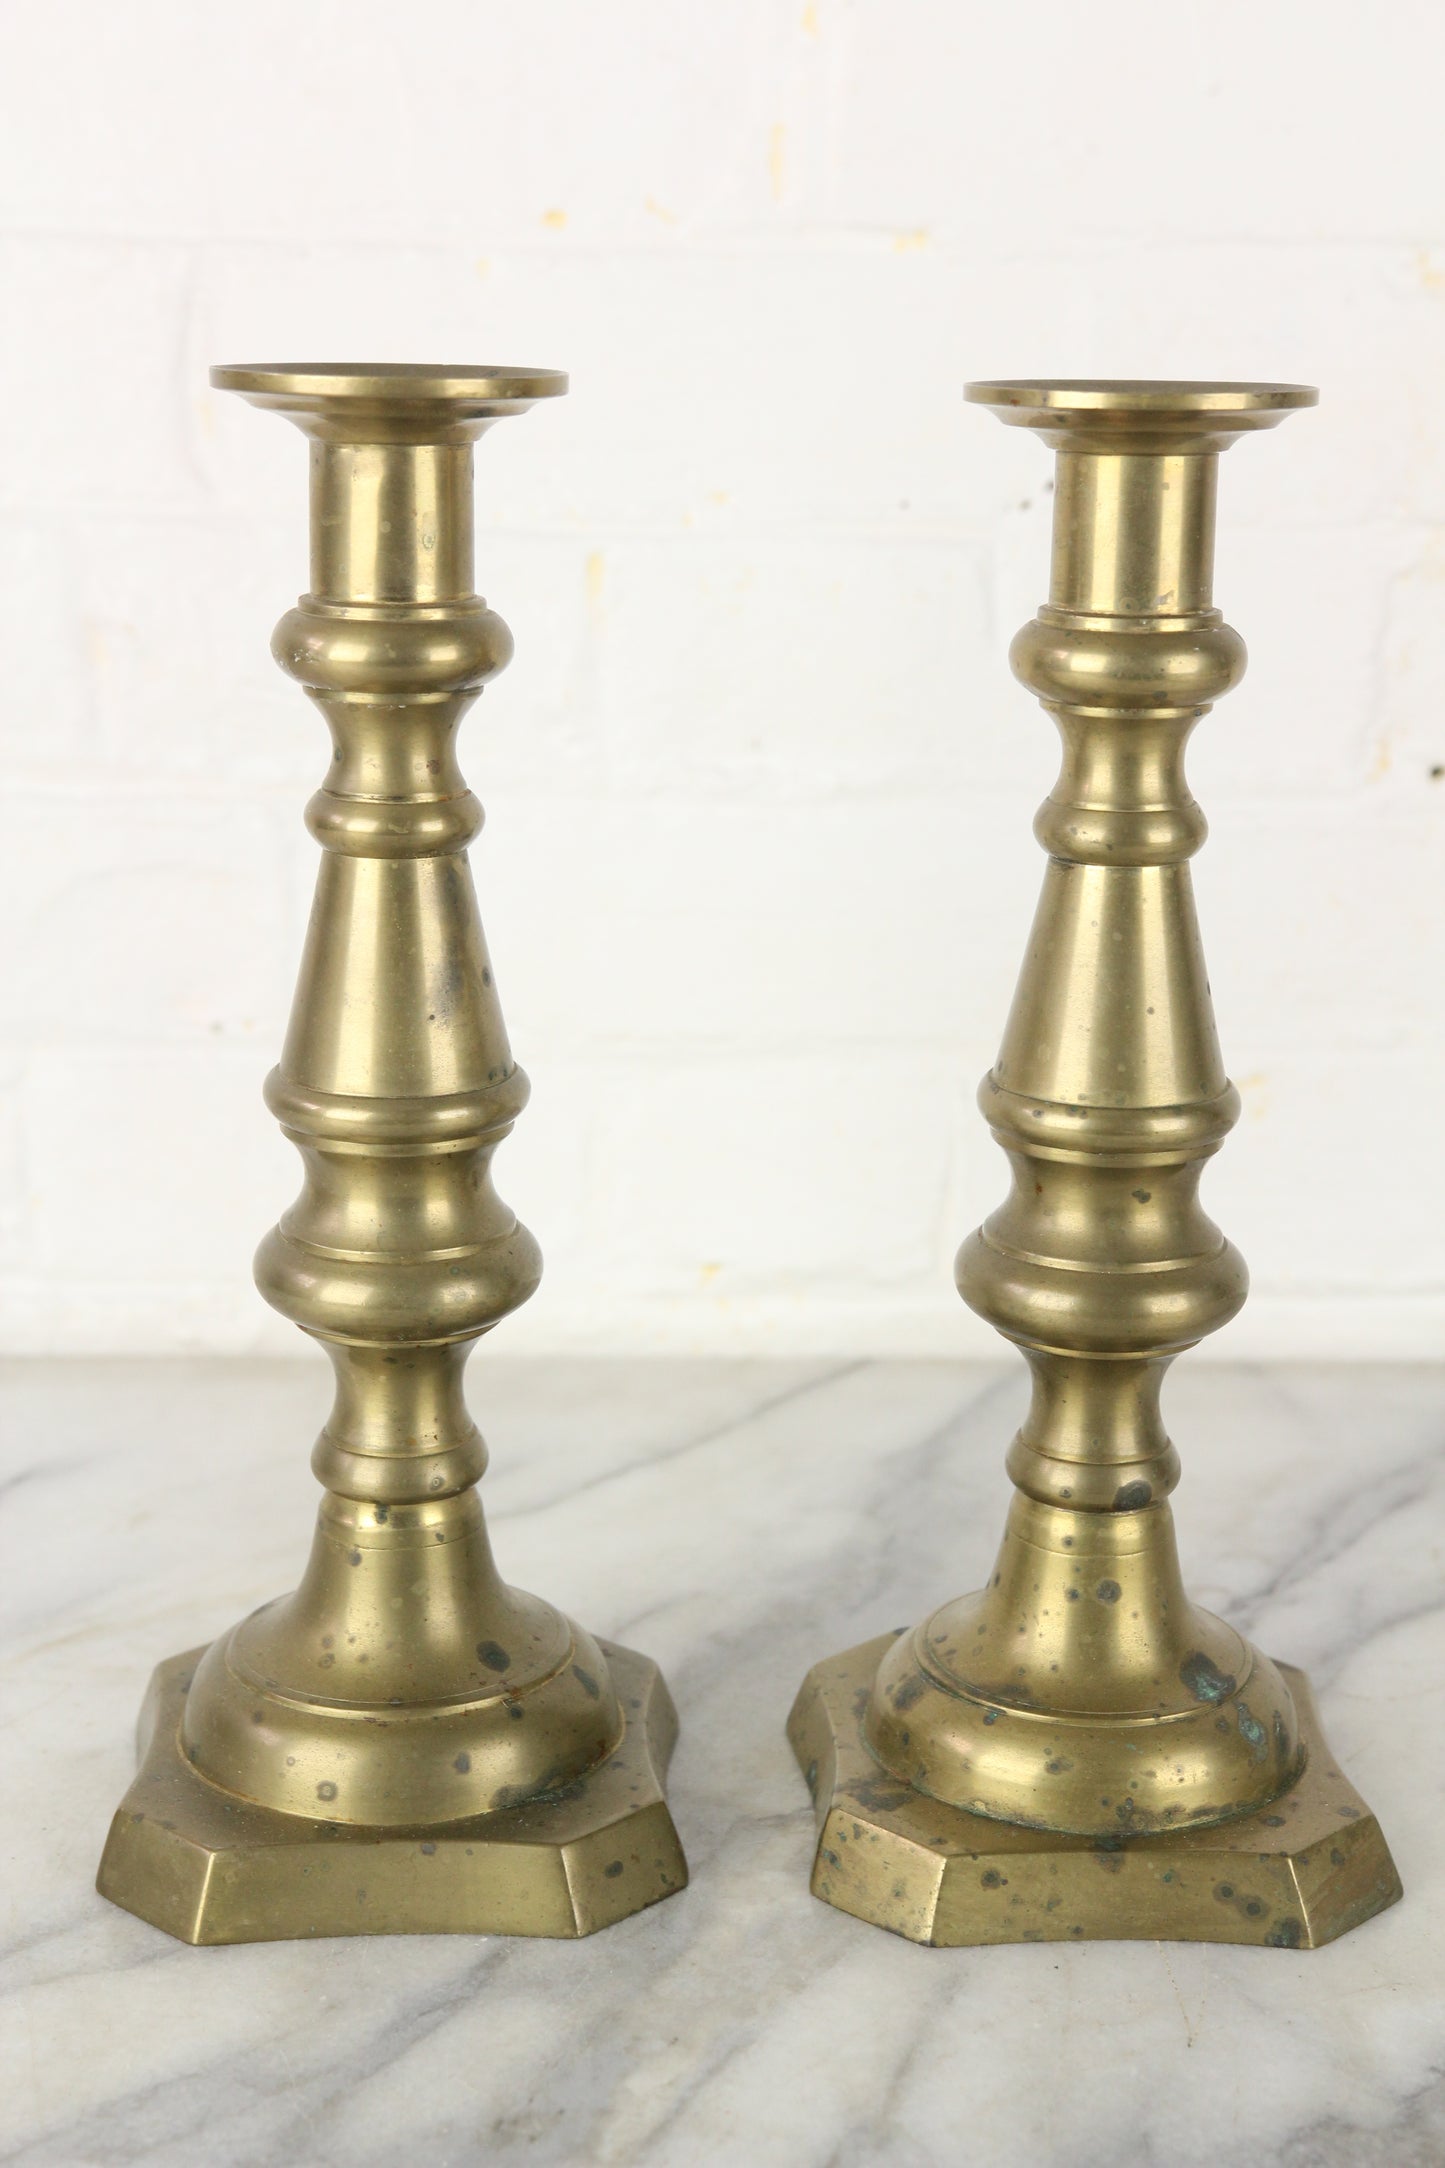 Solid Brass Candlesticks, Marked China, Pair - 10"